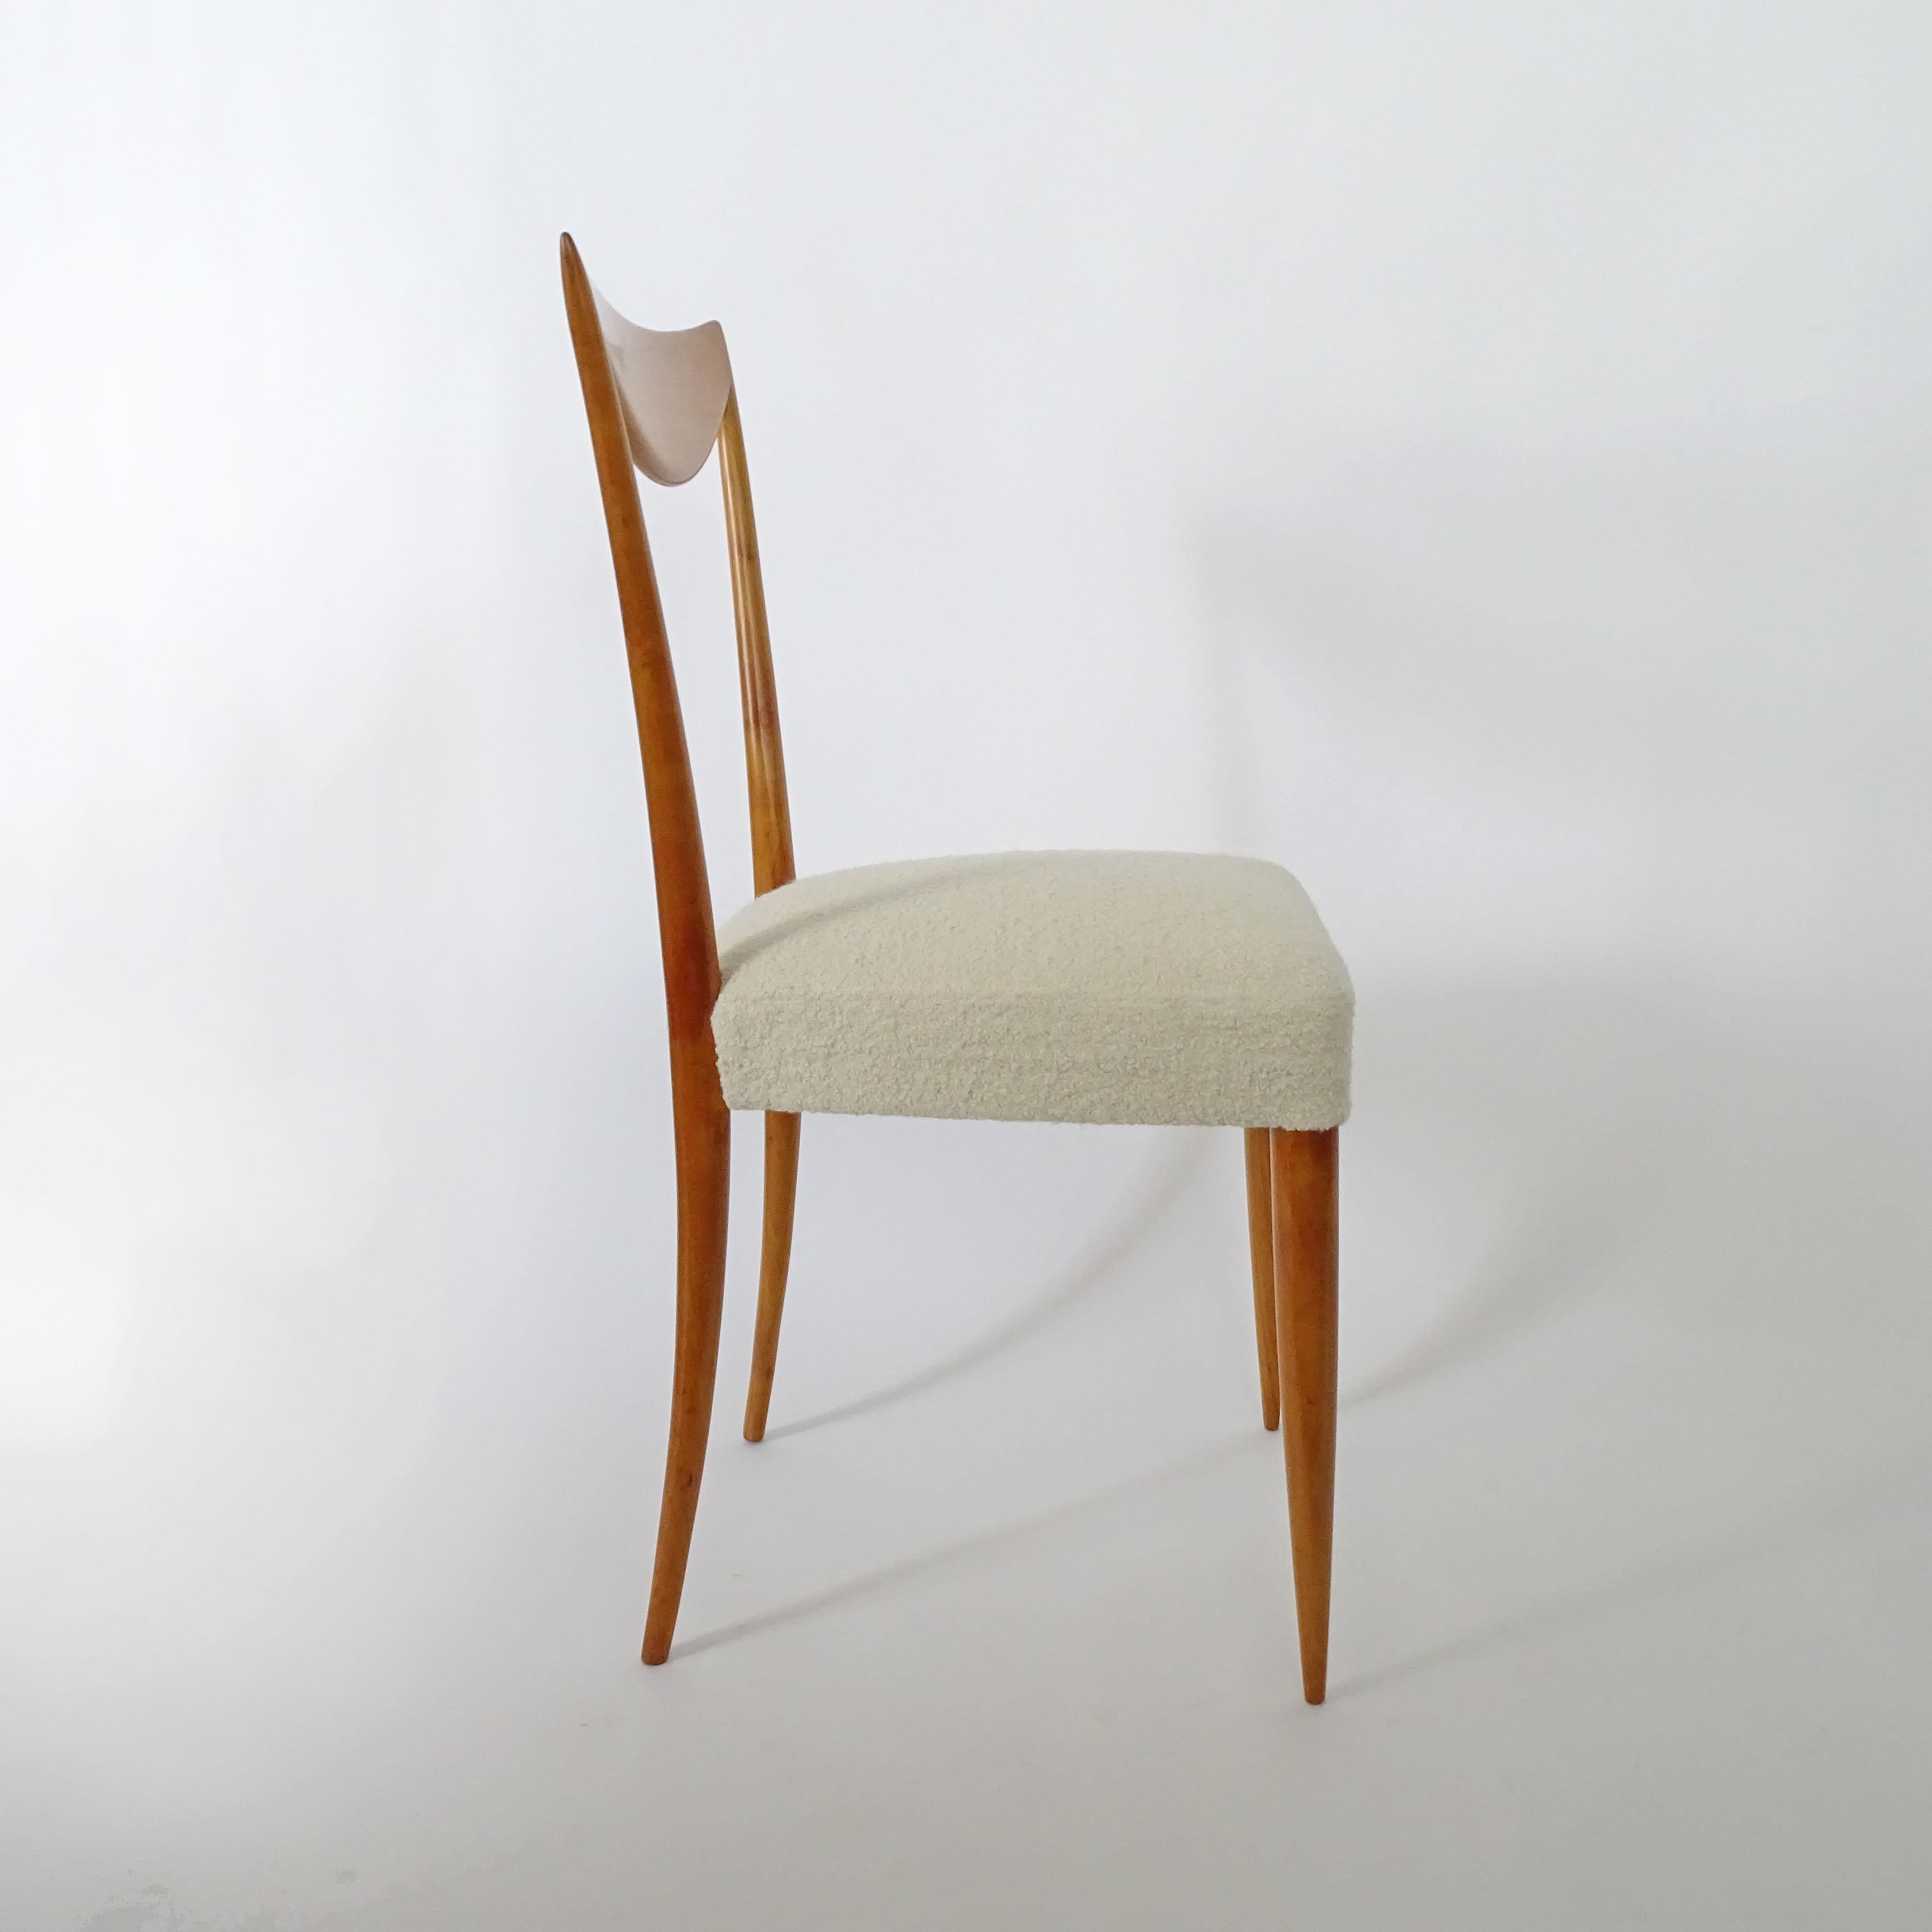 Mid-20th Century Italian 1950s Sculptural Single Chair For Sale